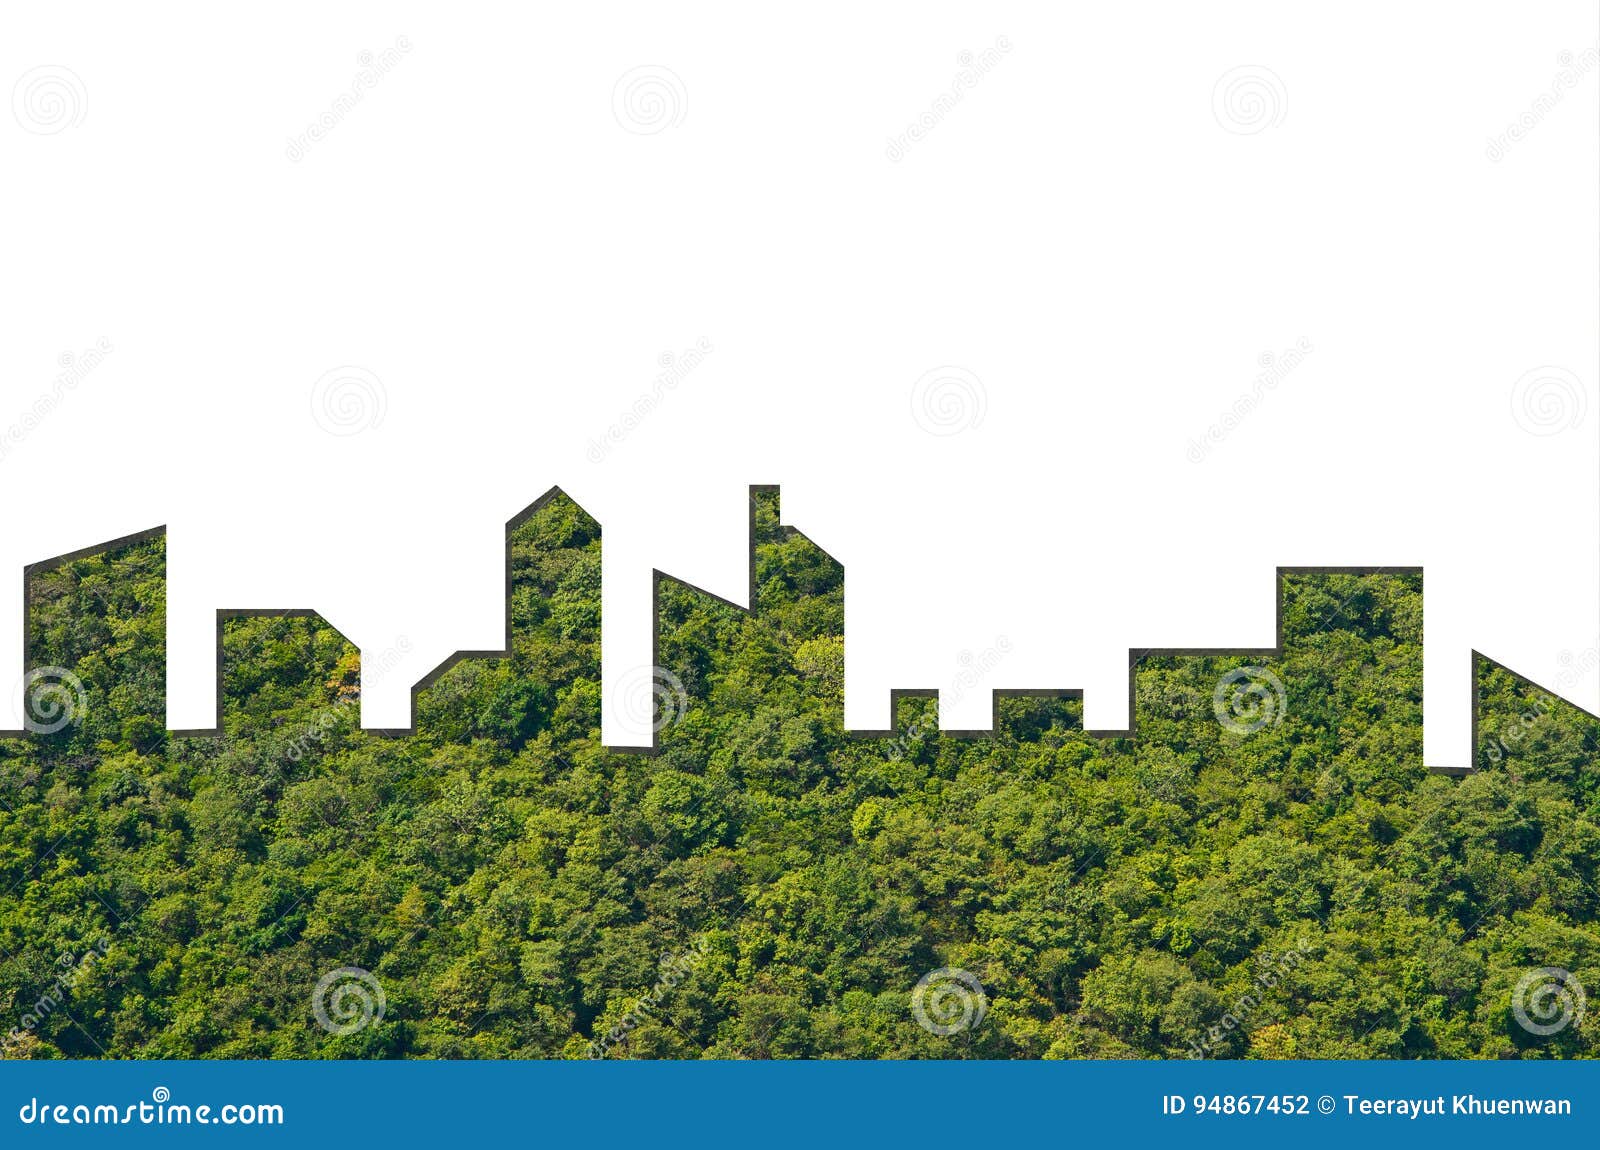 Graphic of City Shape on Forest Texture Background. Green Building  Architecture Stock Photo - Image of green, texture: 94867452